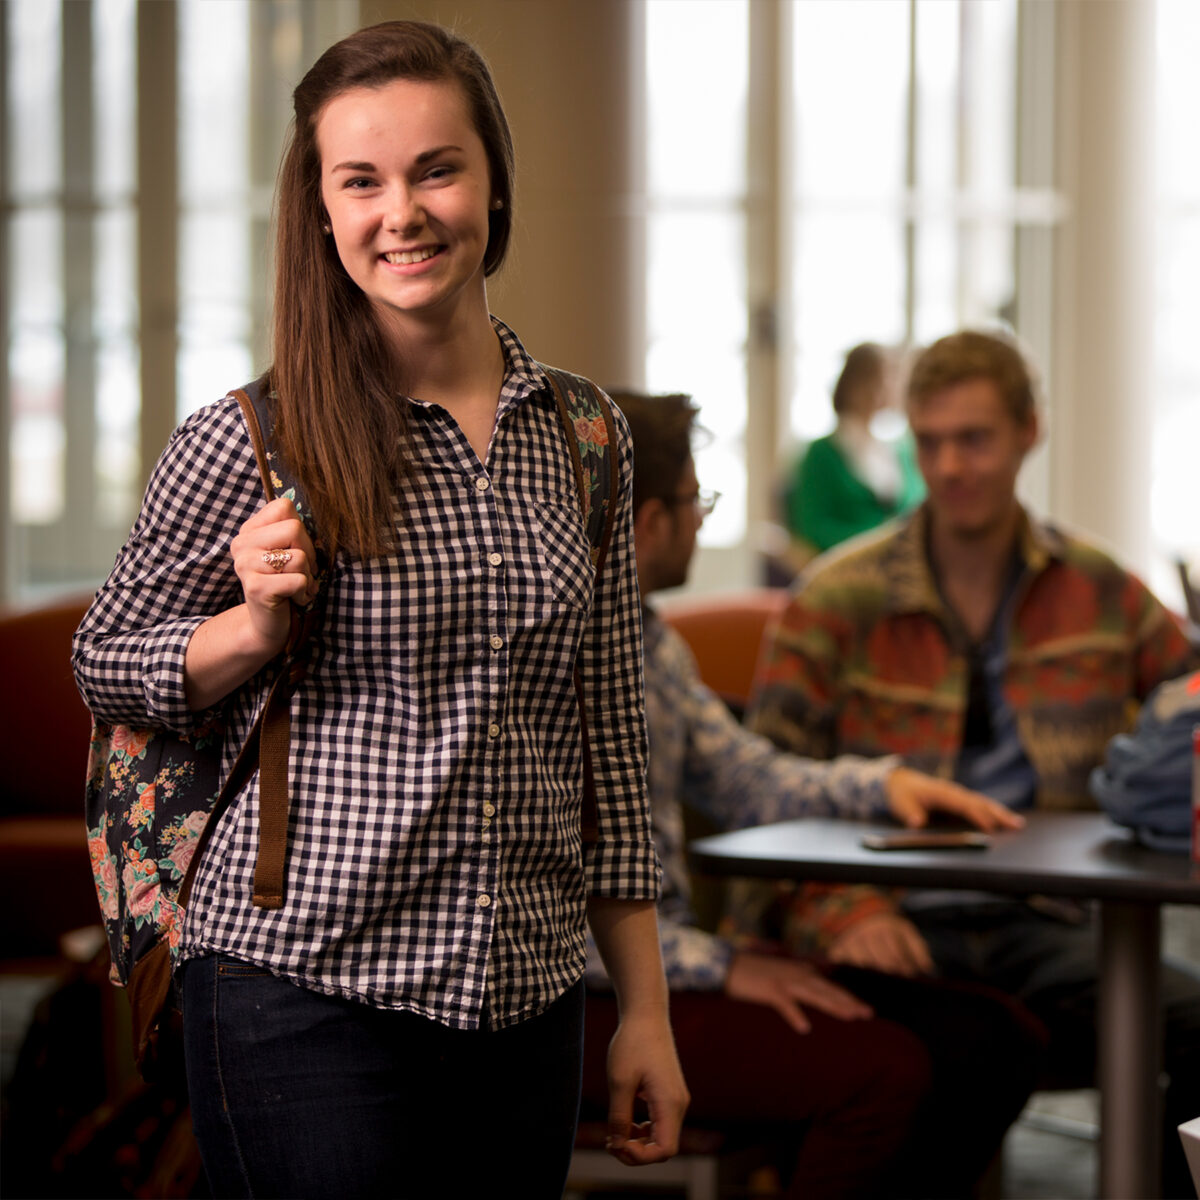 Girl in checkered shirt, holding a backpack